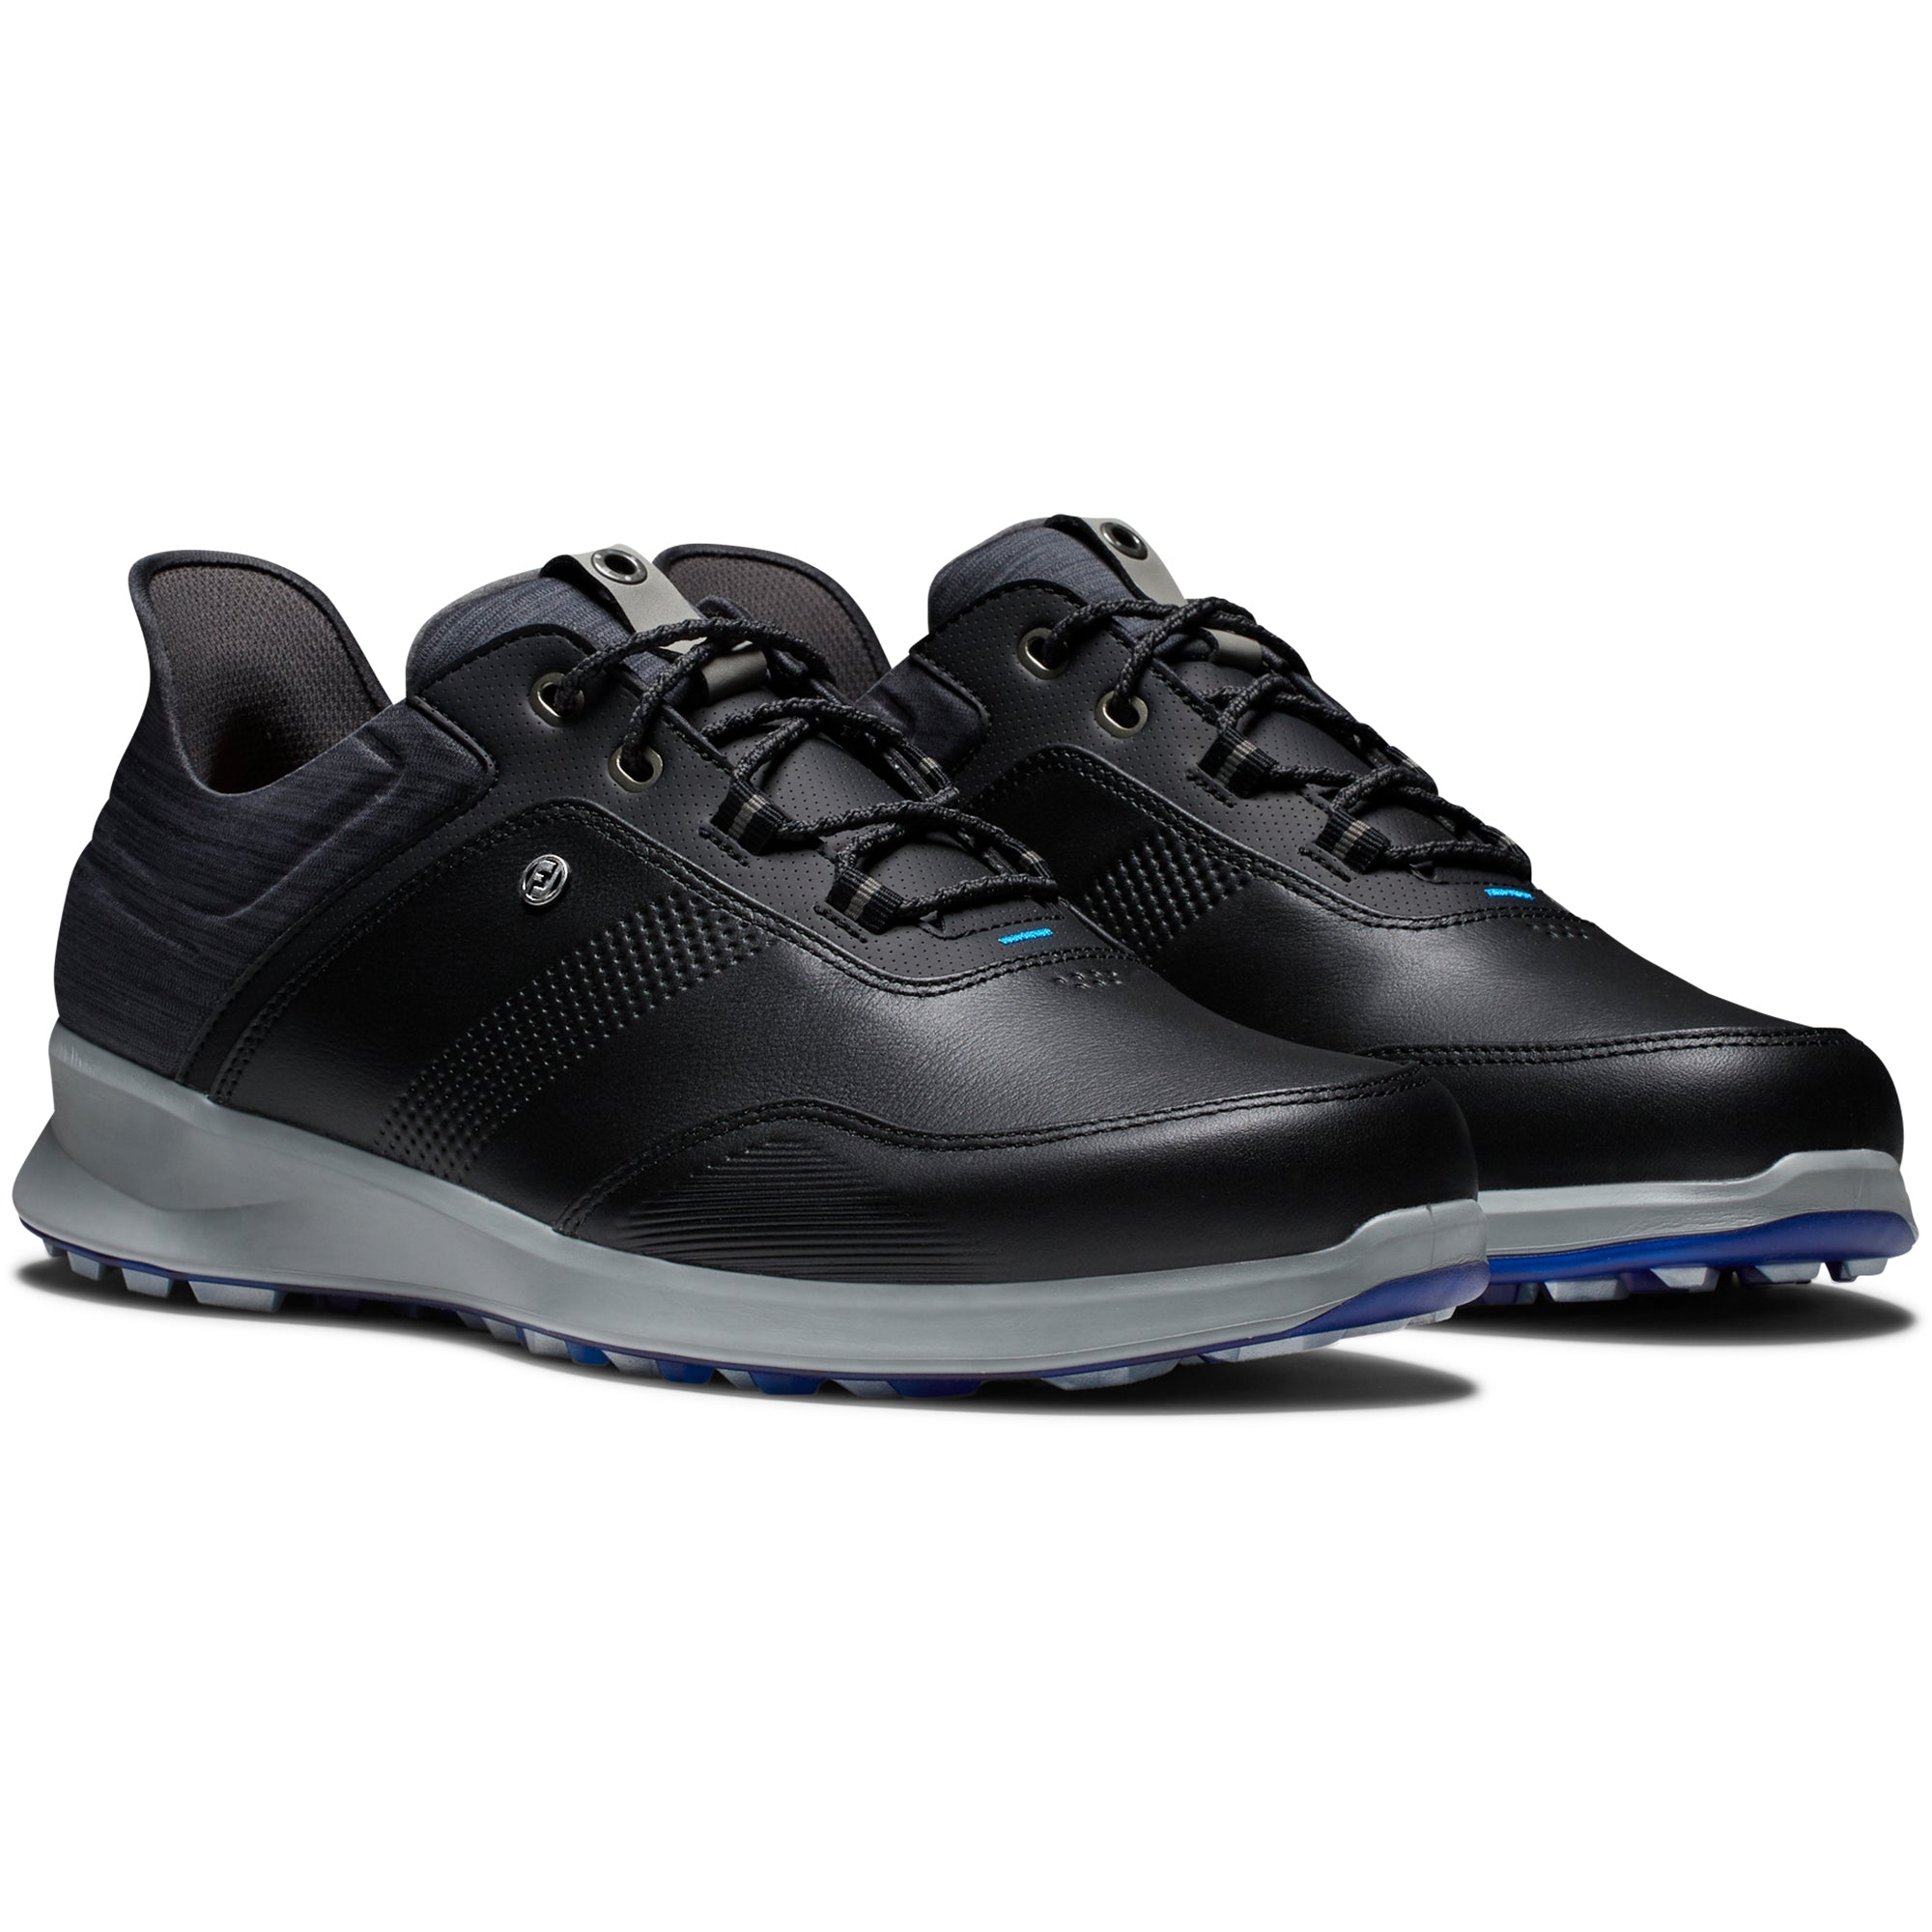 FootJoy Stratos Golf Shoes 50078 Black Charcoal Blue Jay | Function18